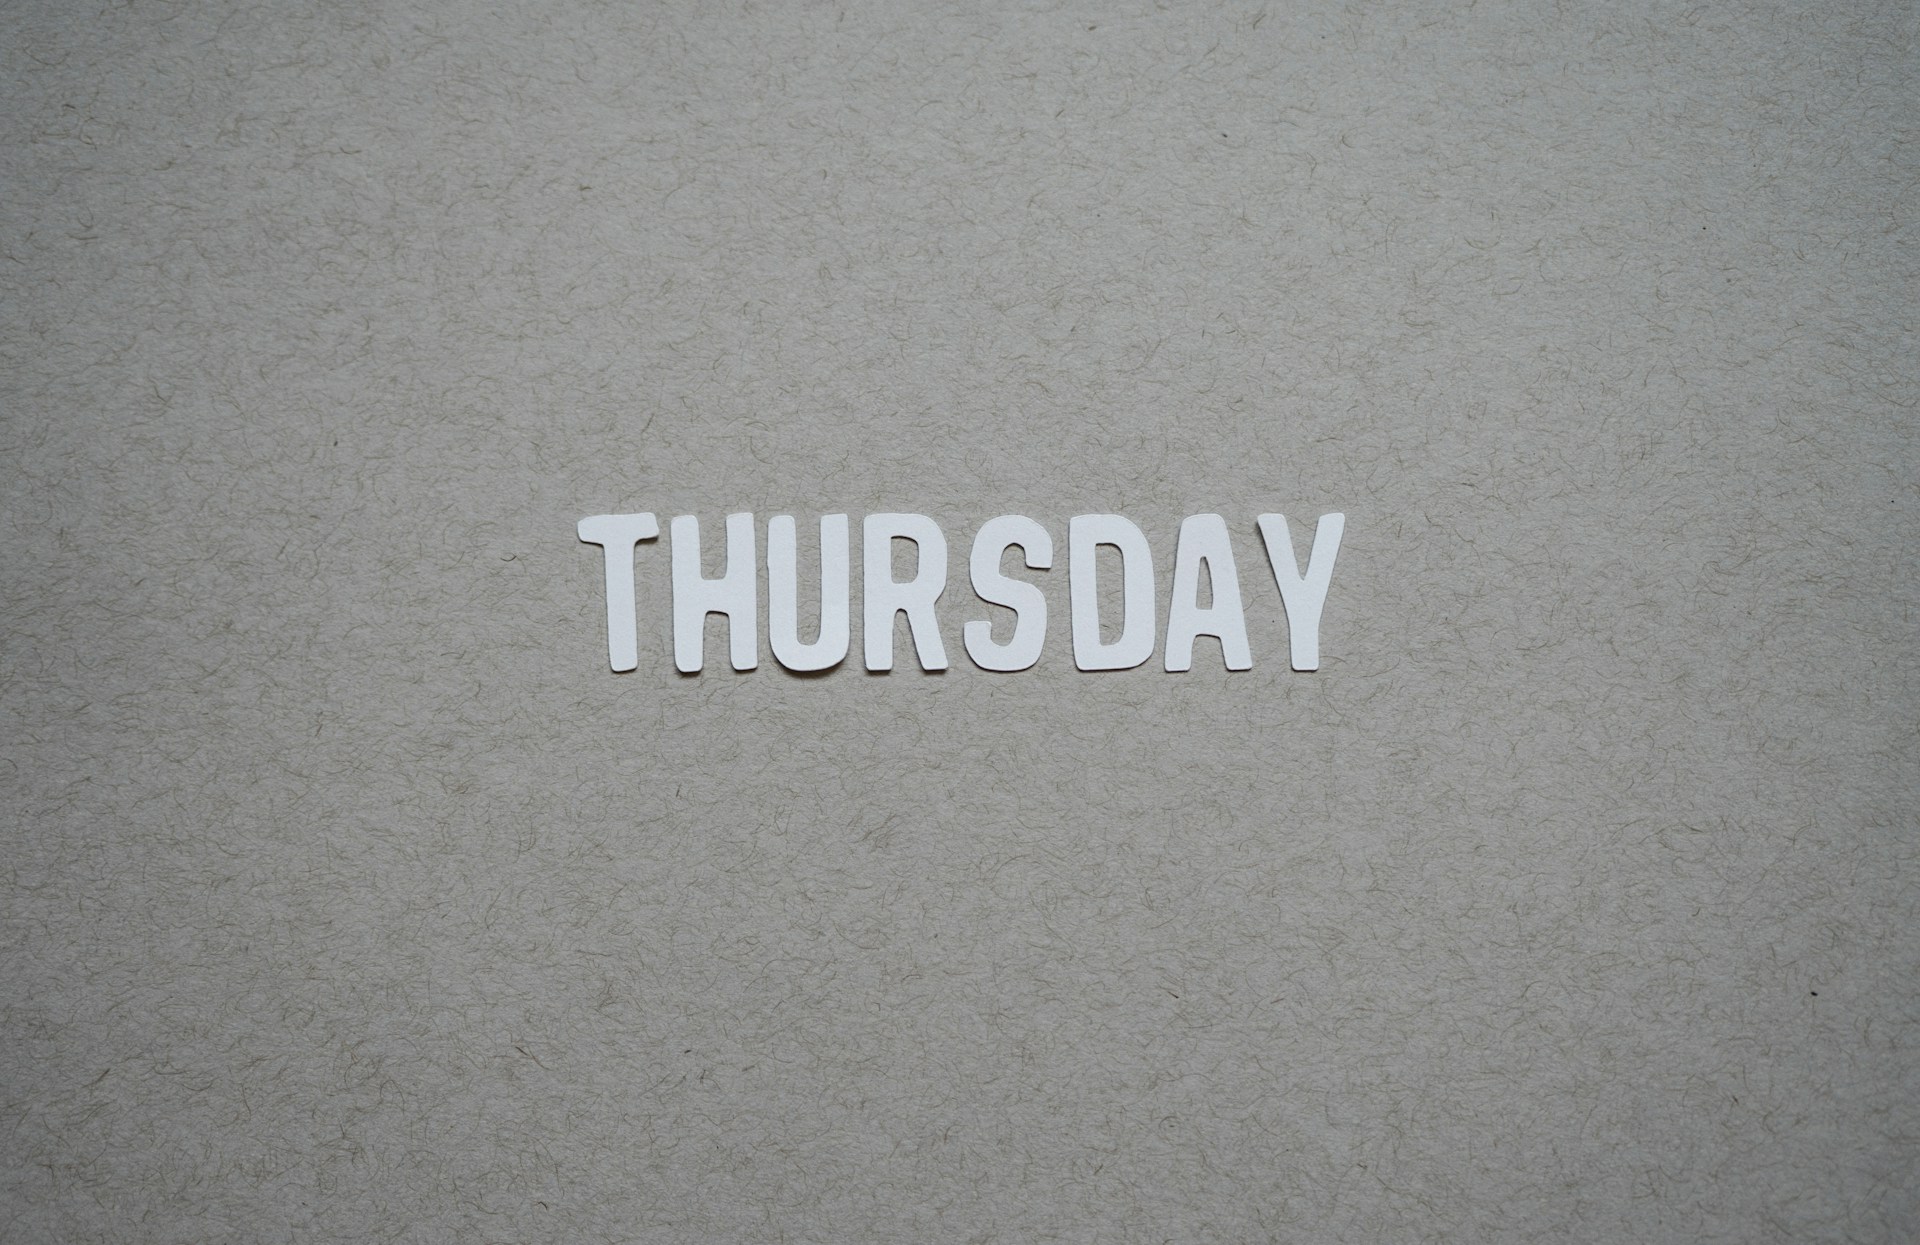 paper-cutout-of-the-word-thursday-against-gray-background